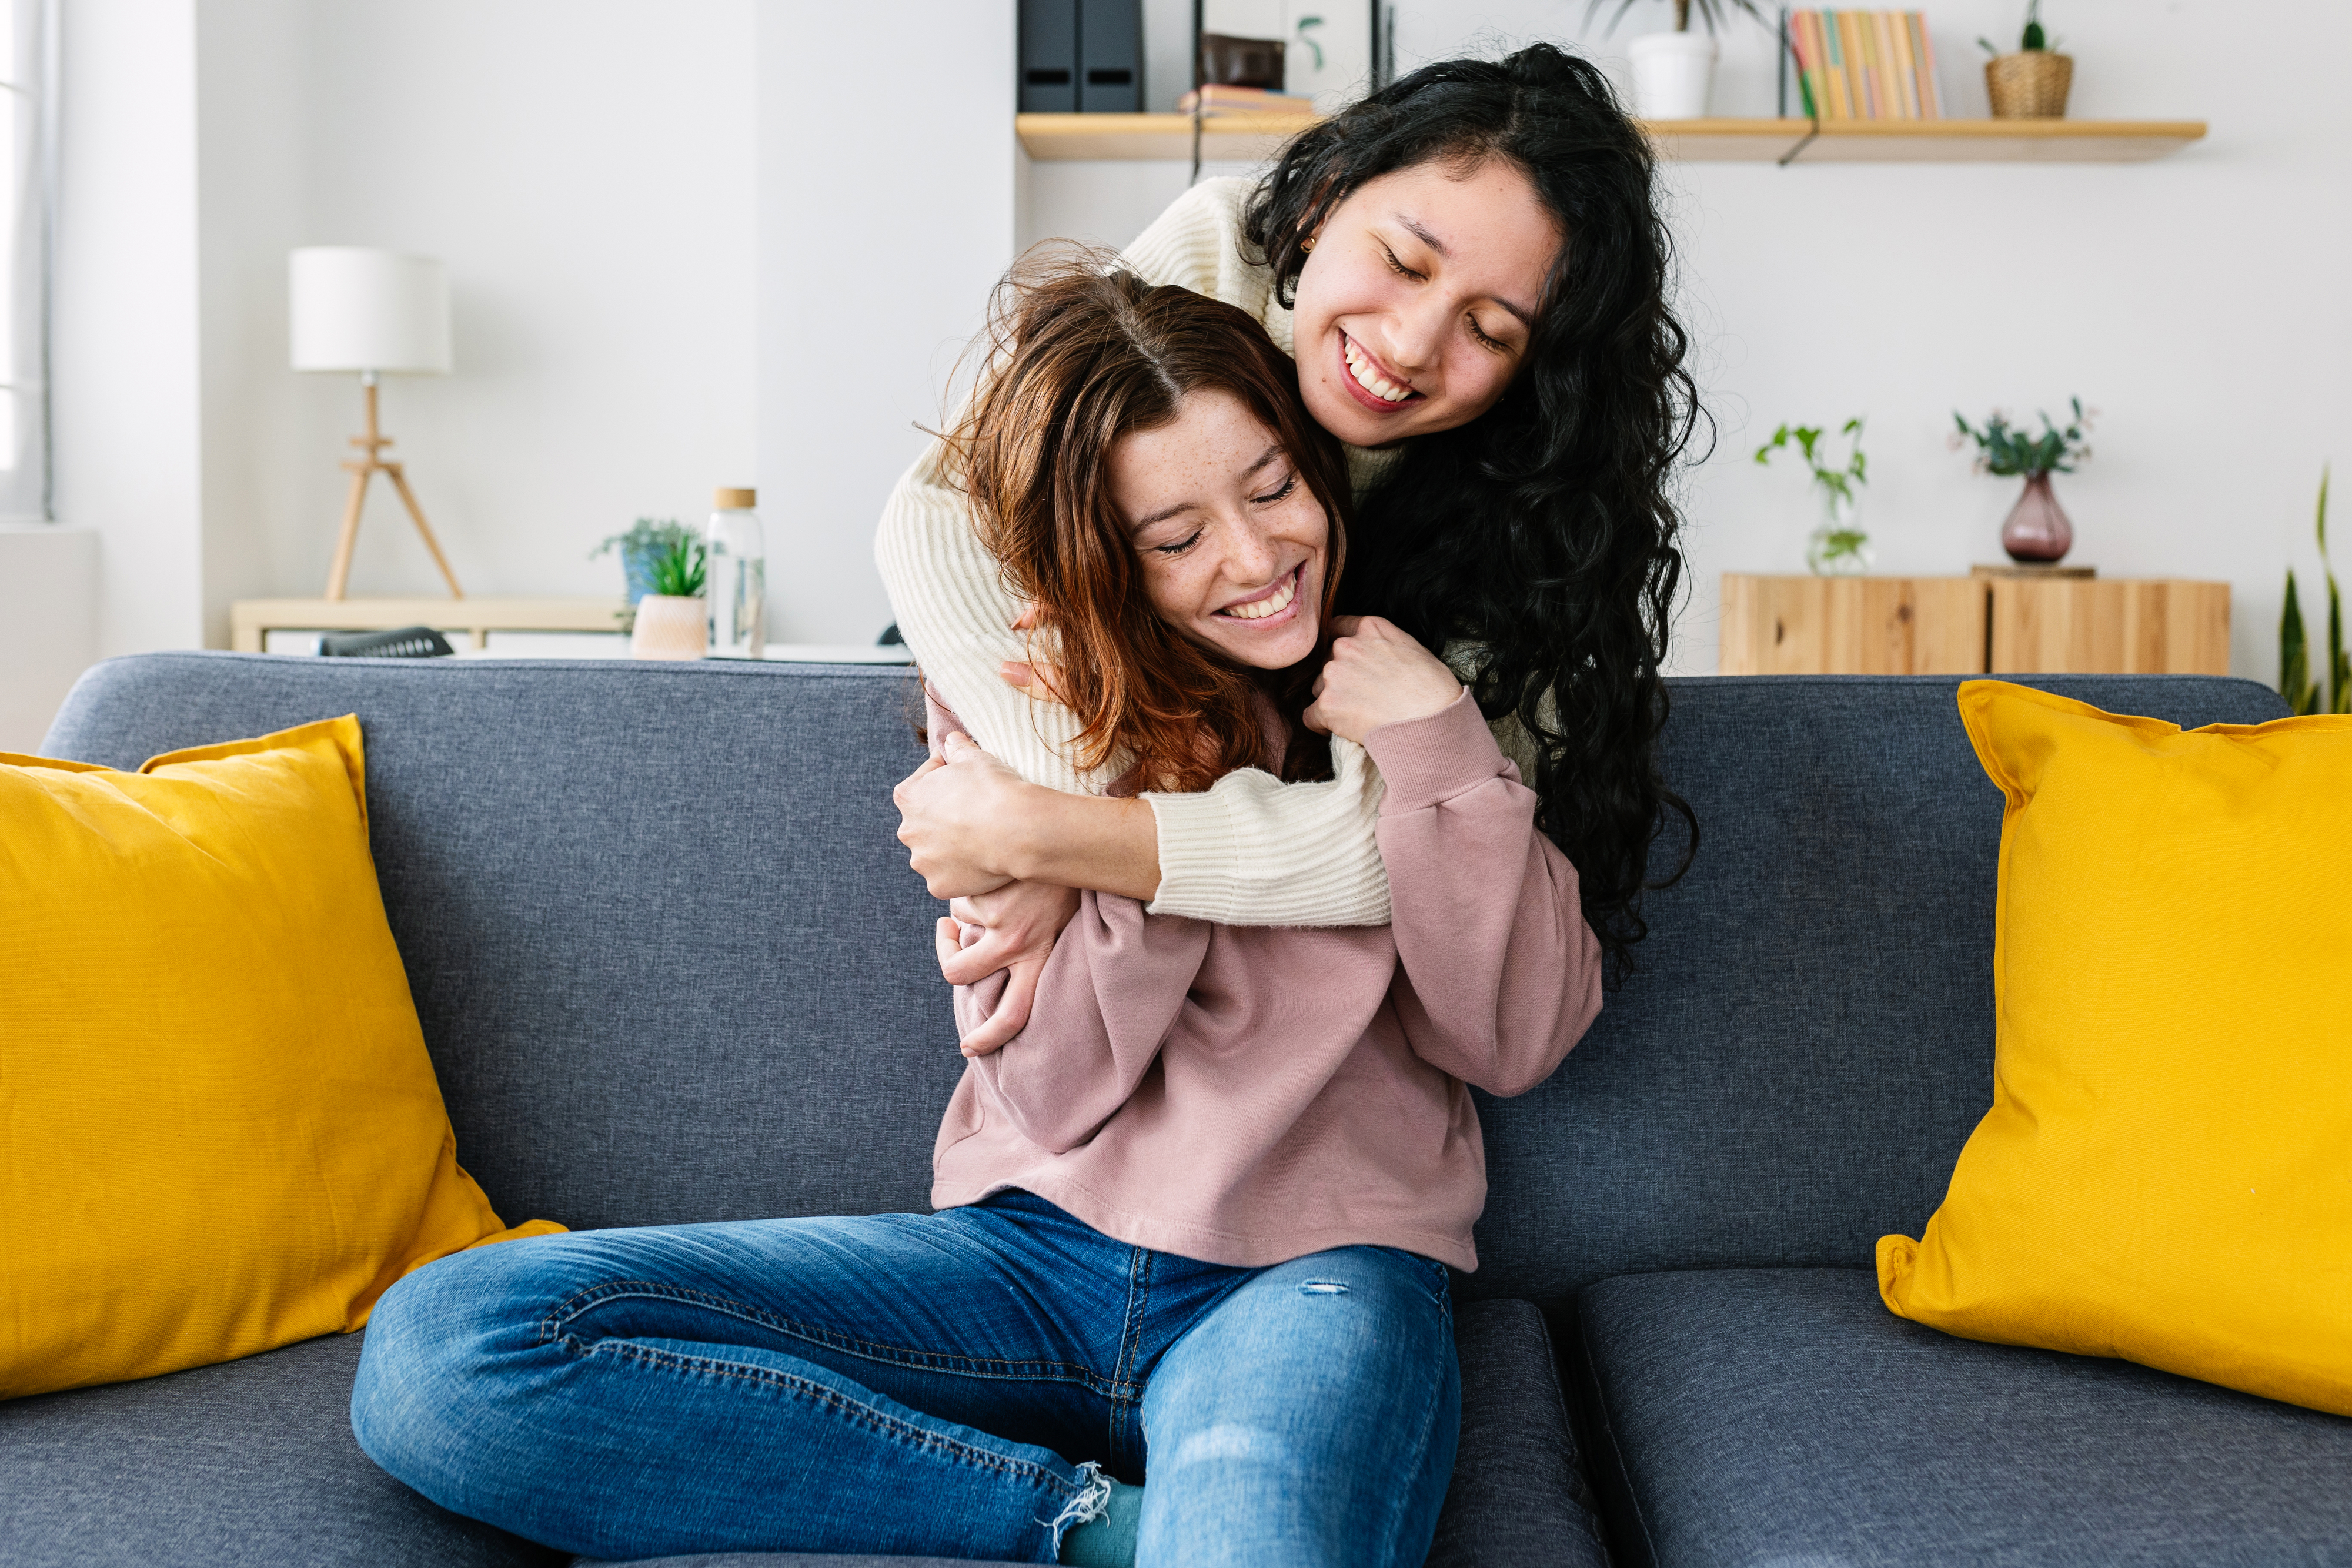 Two women embracing each other affectionately on a couch